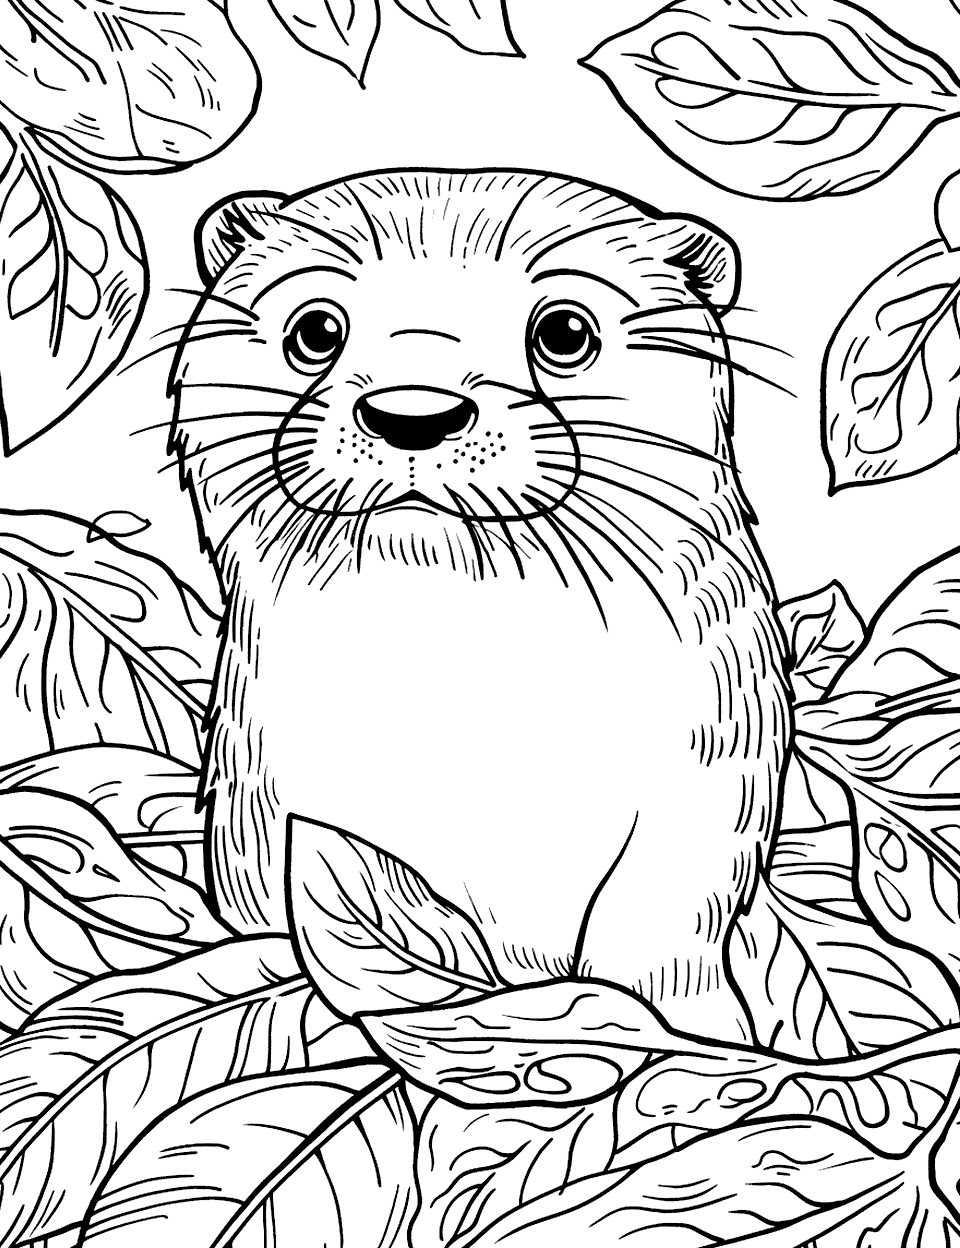 Otter Hiding in Autumn Leaves Coloring Page - An otter camouflaged among fallen leaves, with its eyes peeking out.